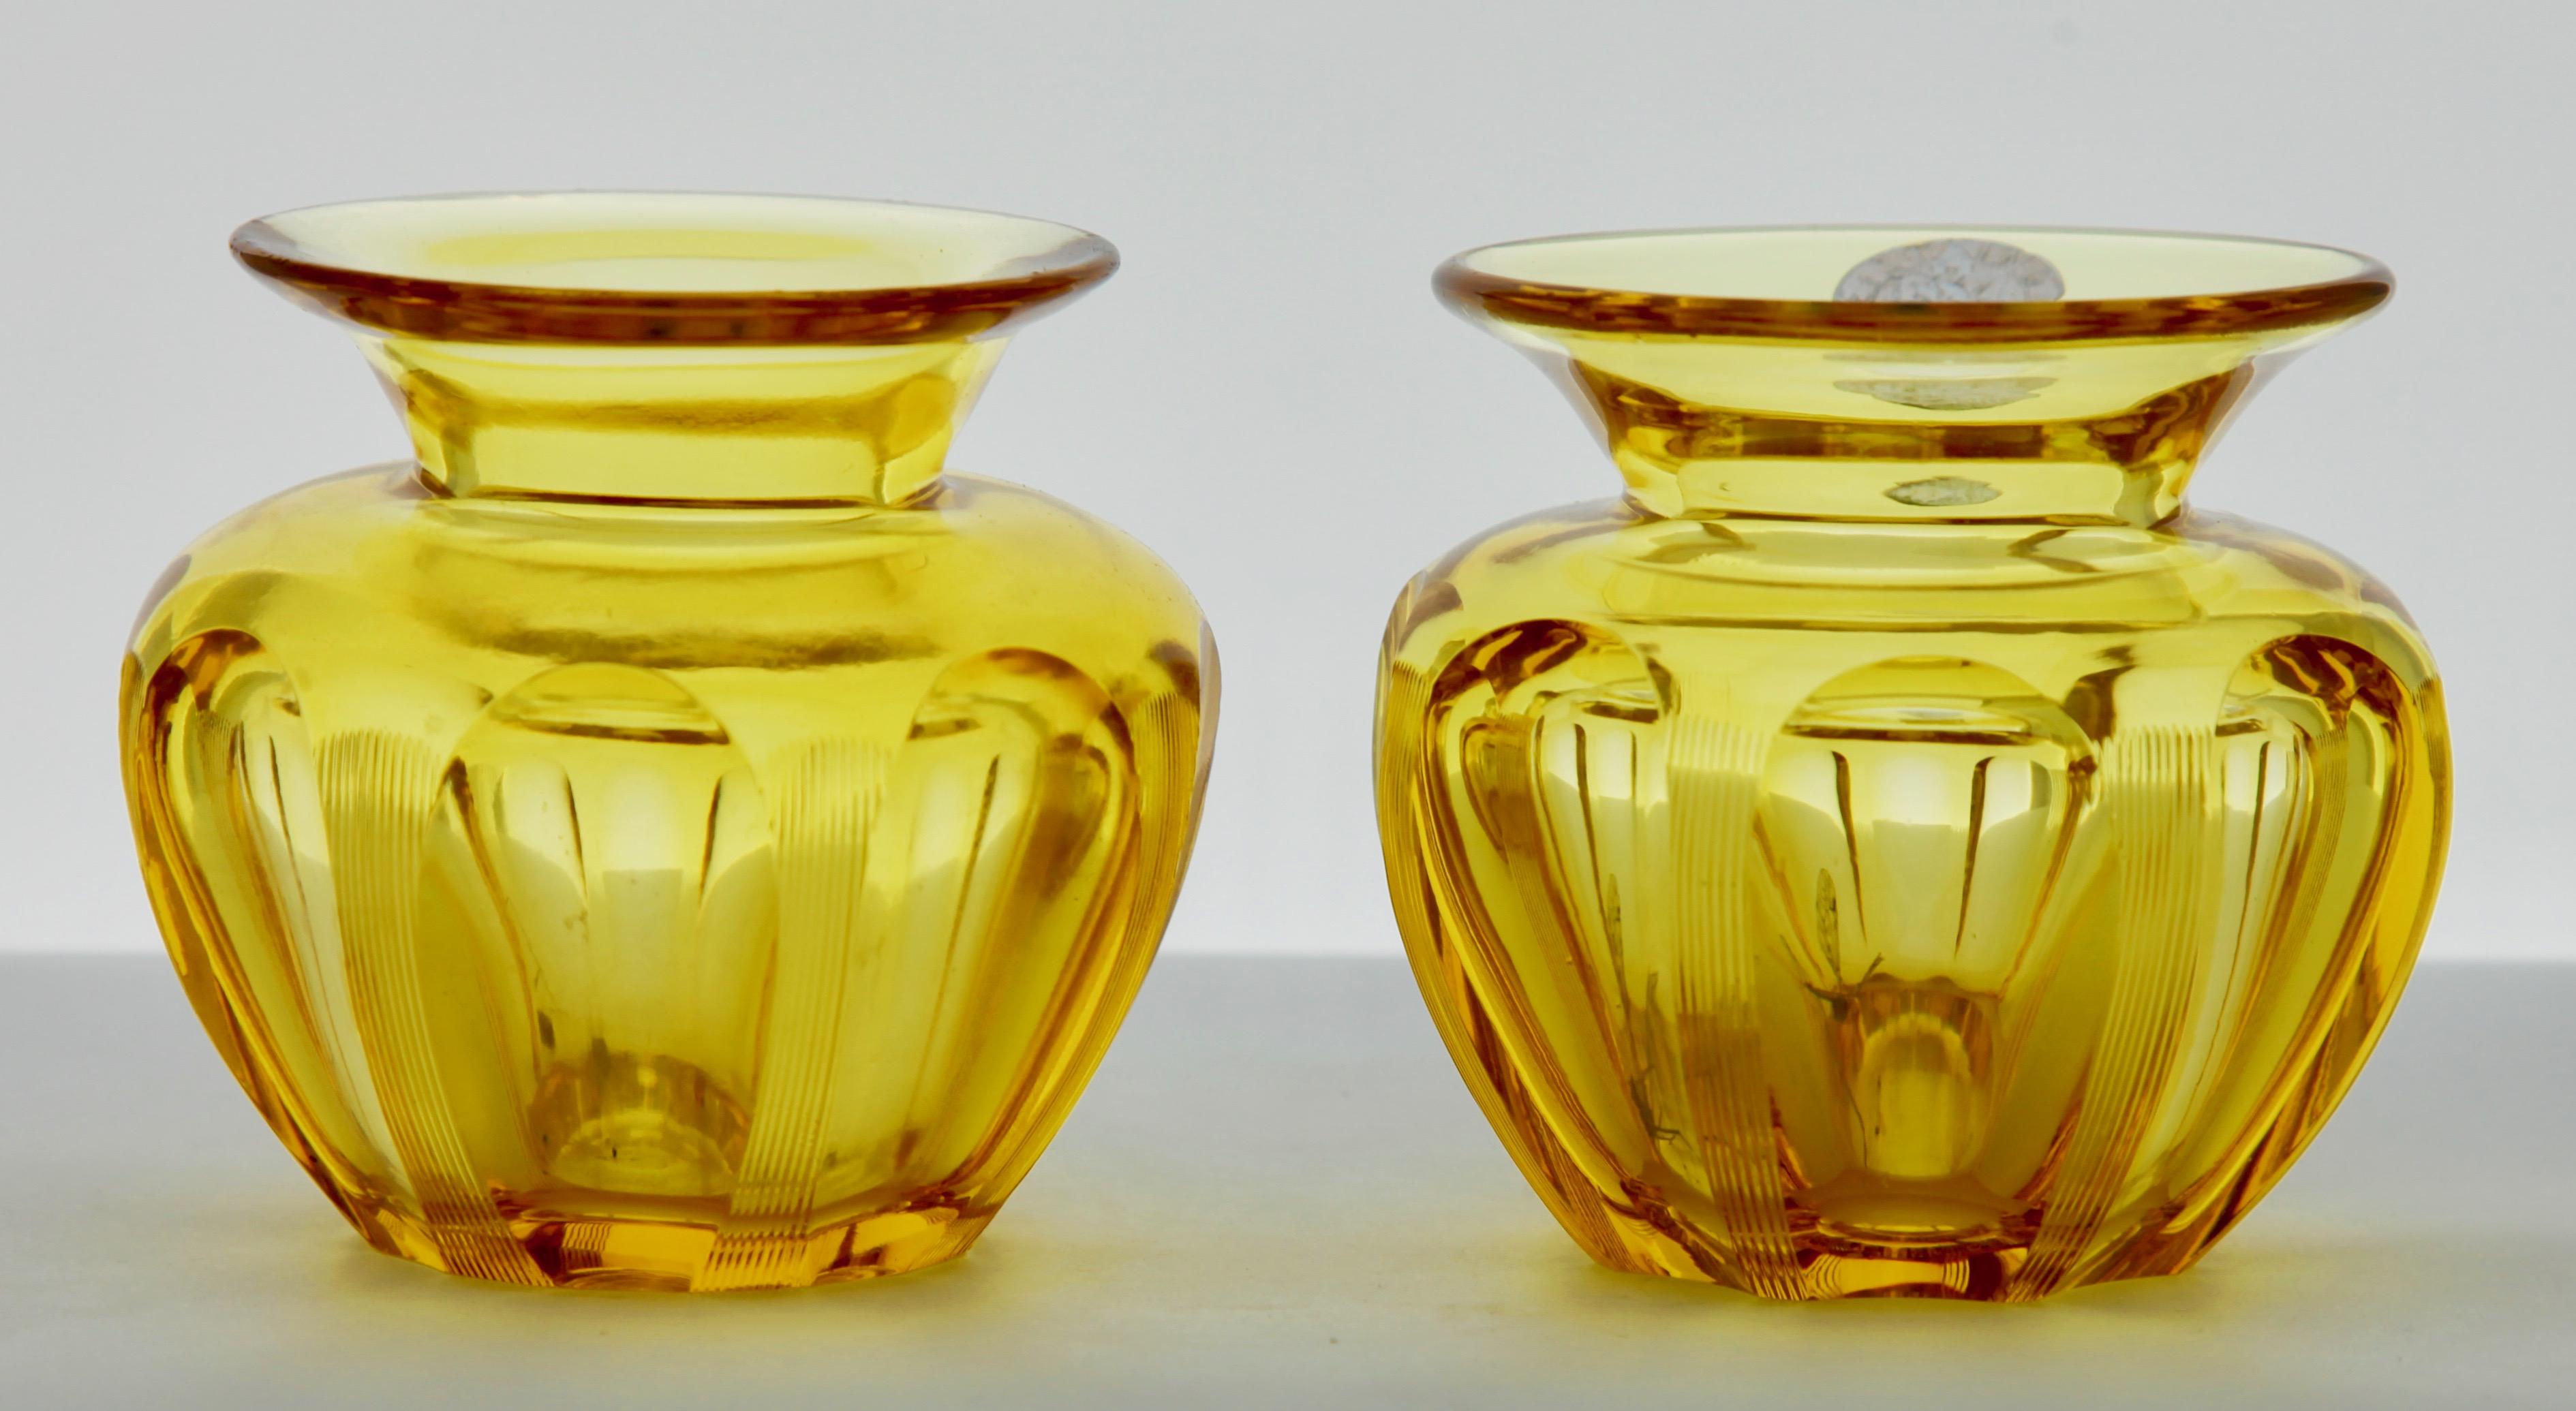 Mid-20th Century Gold-Amber Matching Pair of Cut Crystal Table Vases, with Sticker WMF